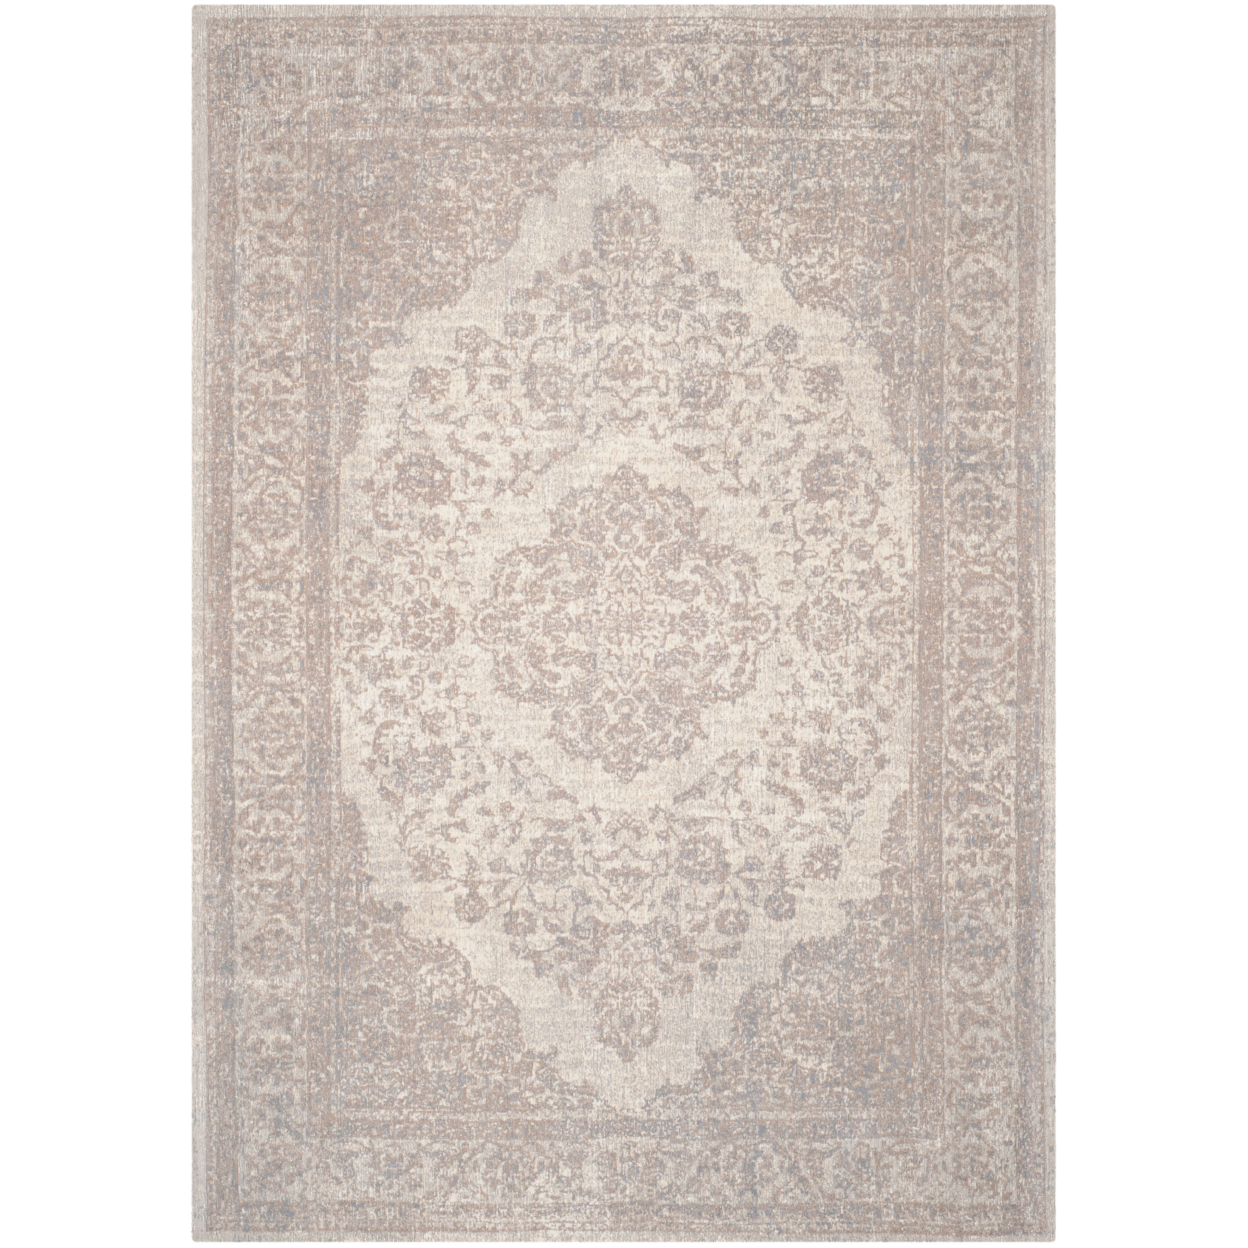 SAFAVIEH Classic Vintage Collection CLV121A Beige Rug - 6' X 9'